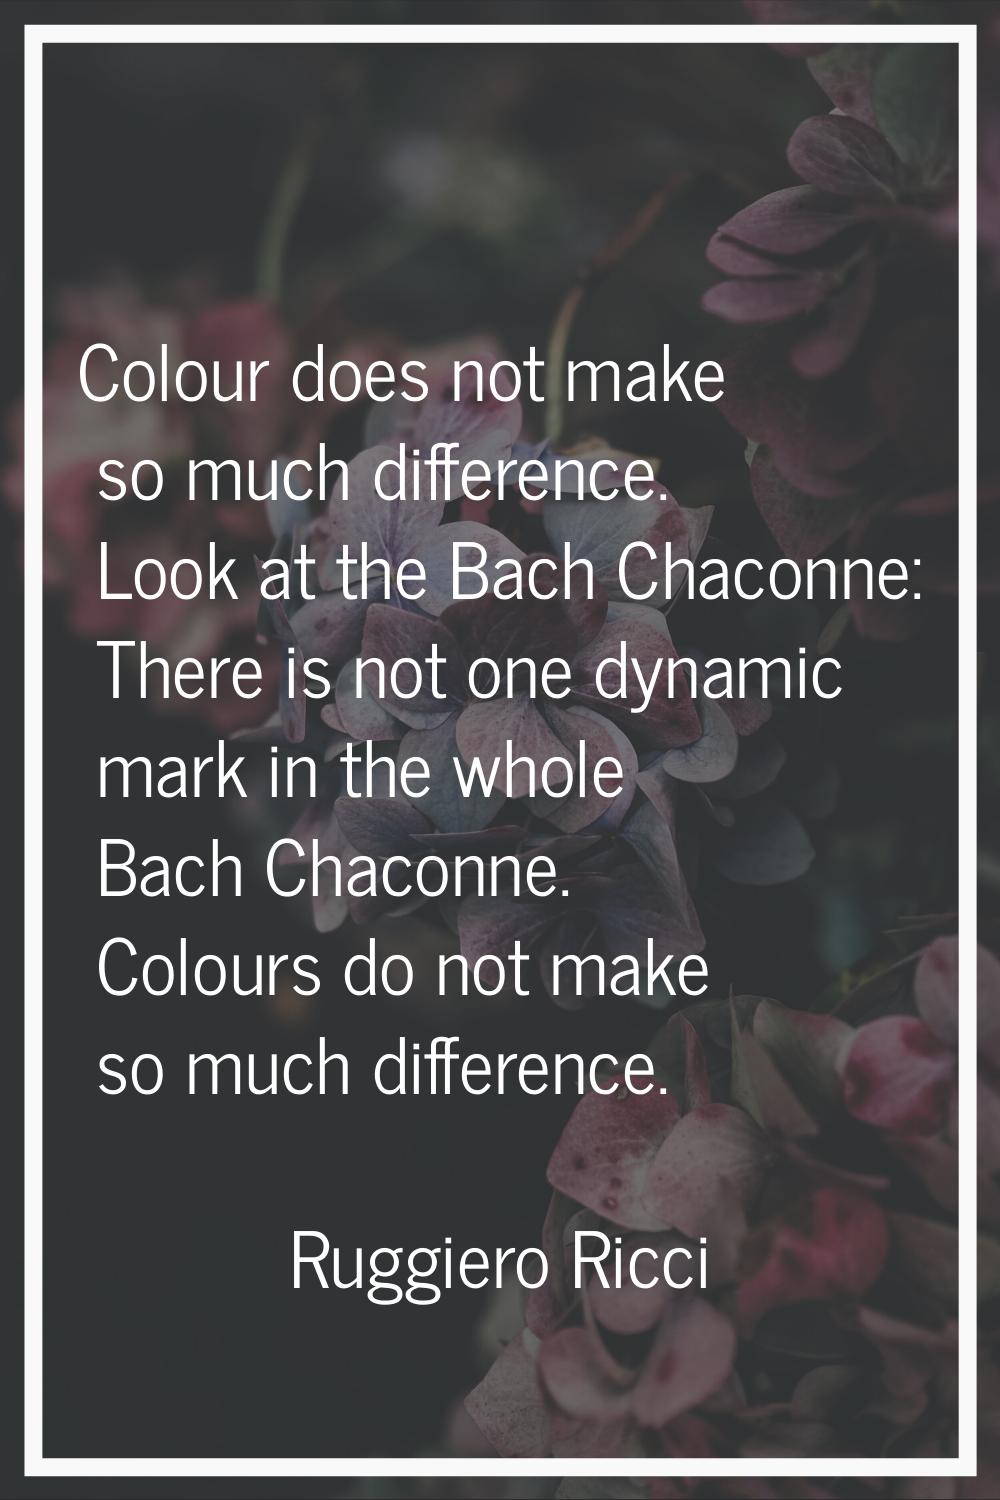 Colour does not make so much difference. Look at the Bach Chaconne: There is not one dynamic mark i